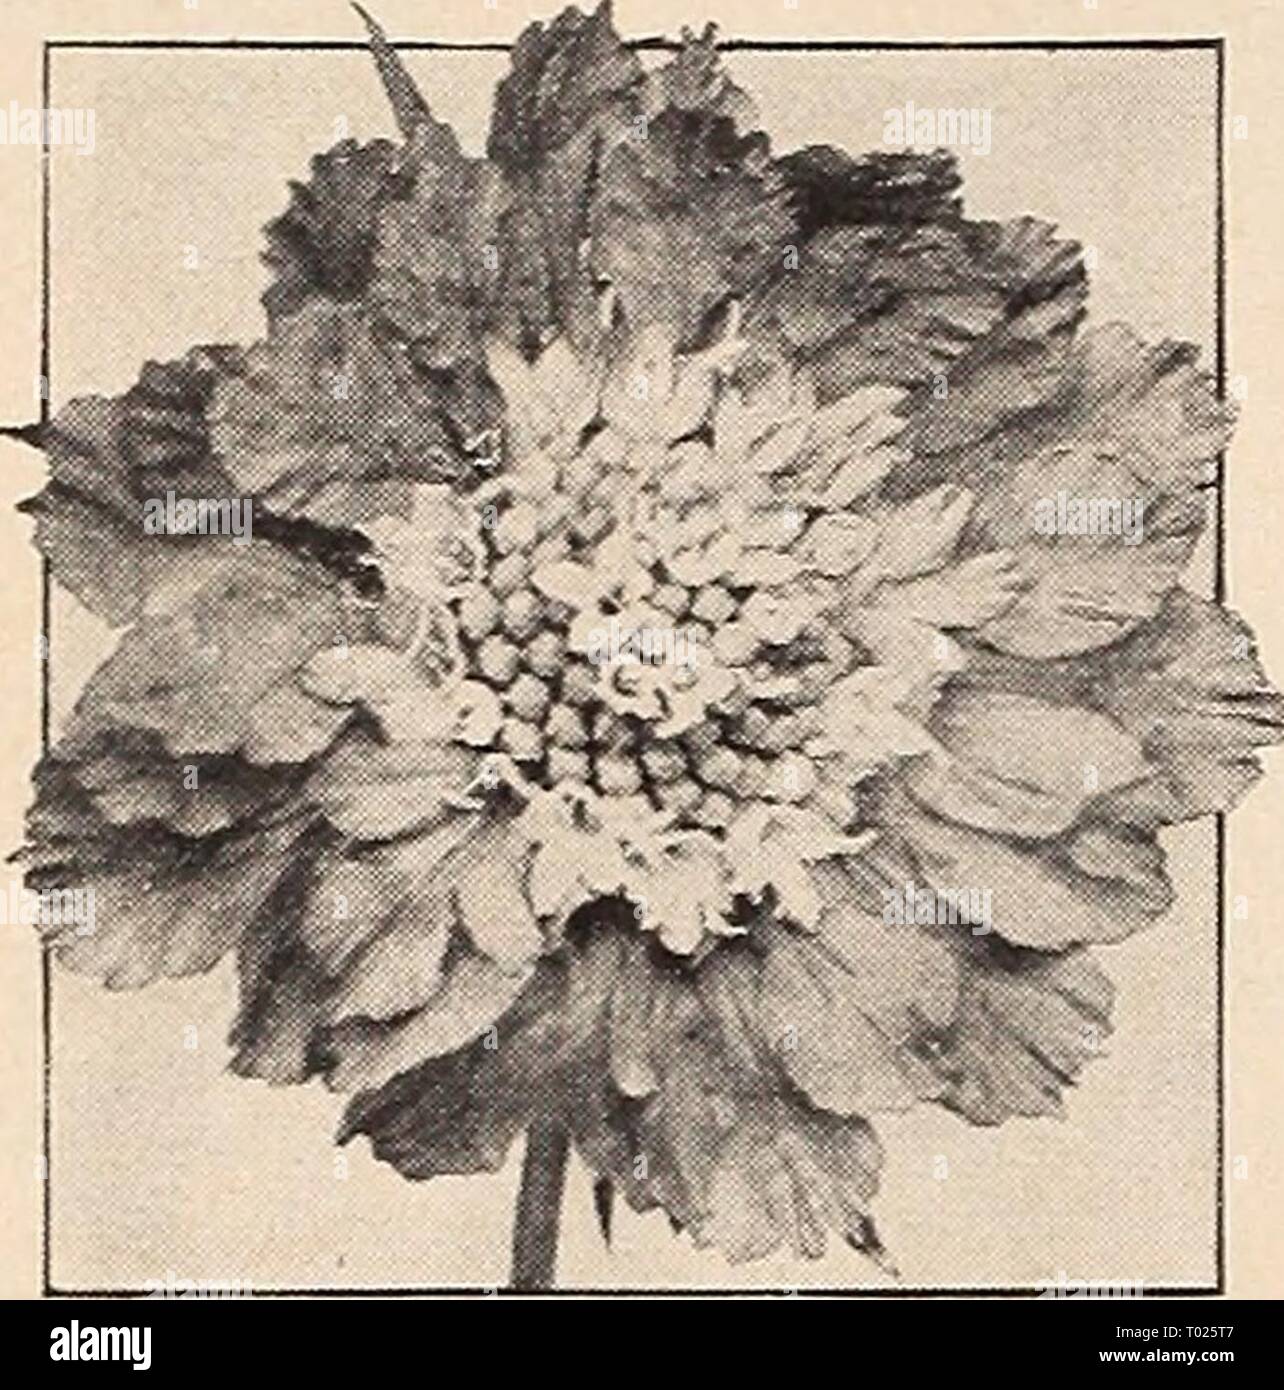 Dreer's garden book for 1941 . dreersgardenbook1941henr Year: 1941  Dreer's Reliable FLOWER SEEDS Large-Flowering Scabiosa Mixed    Scabiosa caucasica, Giant Hybrids Saponaria ® &n Soapwort 3867 Ocymoides, Brilliant. |hp] A Covered all summer long with small bright rose blooms. 9 in. tall. Pkt. 10c; large pkt. 25c; J oz. 40c. 3869 Vaccaria, Rose. ® A very pretty annual 2 feet tall bearing great masses of showy satiny pink flowers not unlike a glorified Gypsophila. Blooms all sum- mer long. Pkt. 10c; oz. 30c. Sanvitalia ® a Creeping Zinnia 3863 Procumbens fl. pi. Fine for dwarf beds, edges, or  Stock Photo